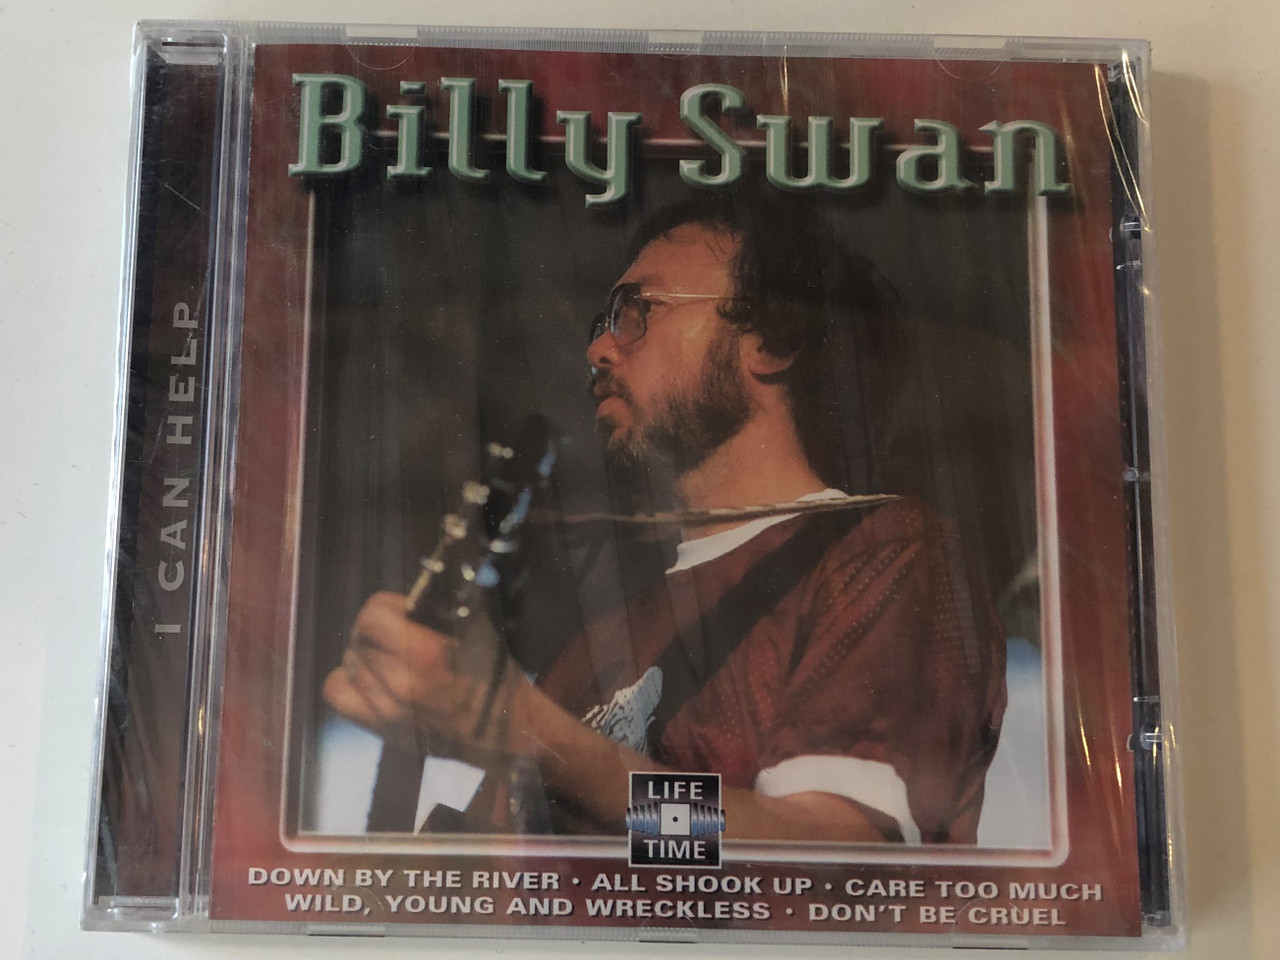 Billy Swan ‎– I Can Help / Down By The River, All Shook Up, Care Too Much,  Wild, Young And Wreckless, Don't Be Cruel / Digimode Entertainment Ltd.  Audio CD 1999 / LT 5113 - bibleinmylanguage